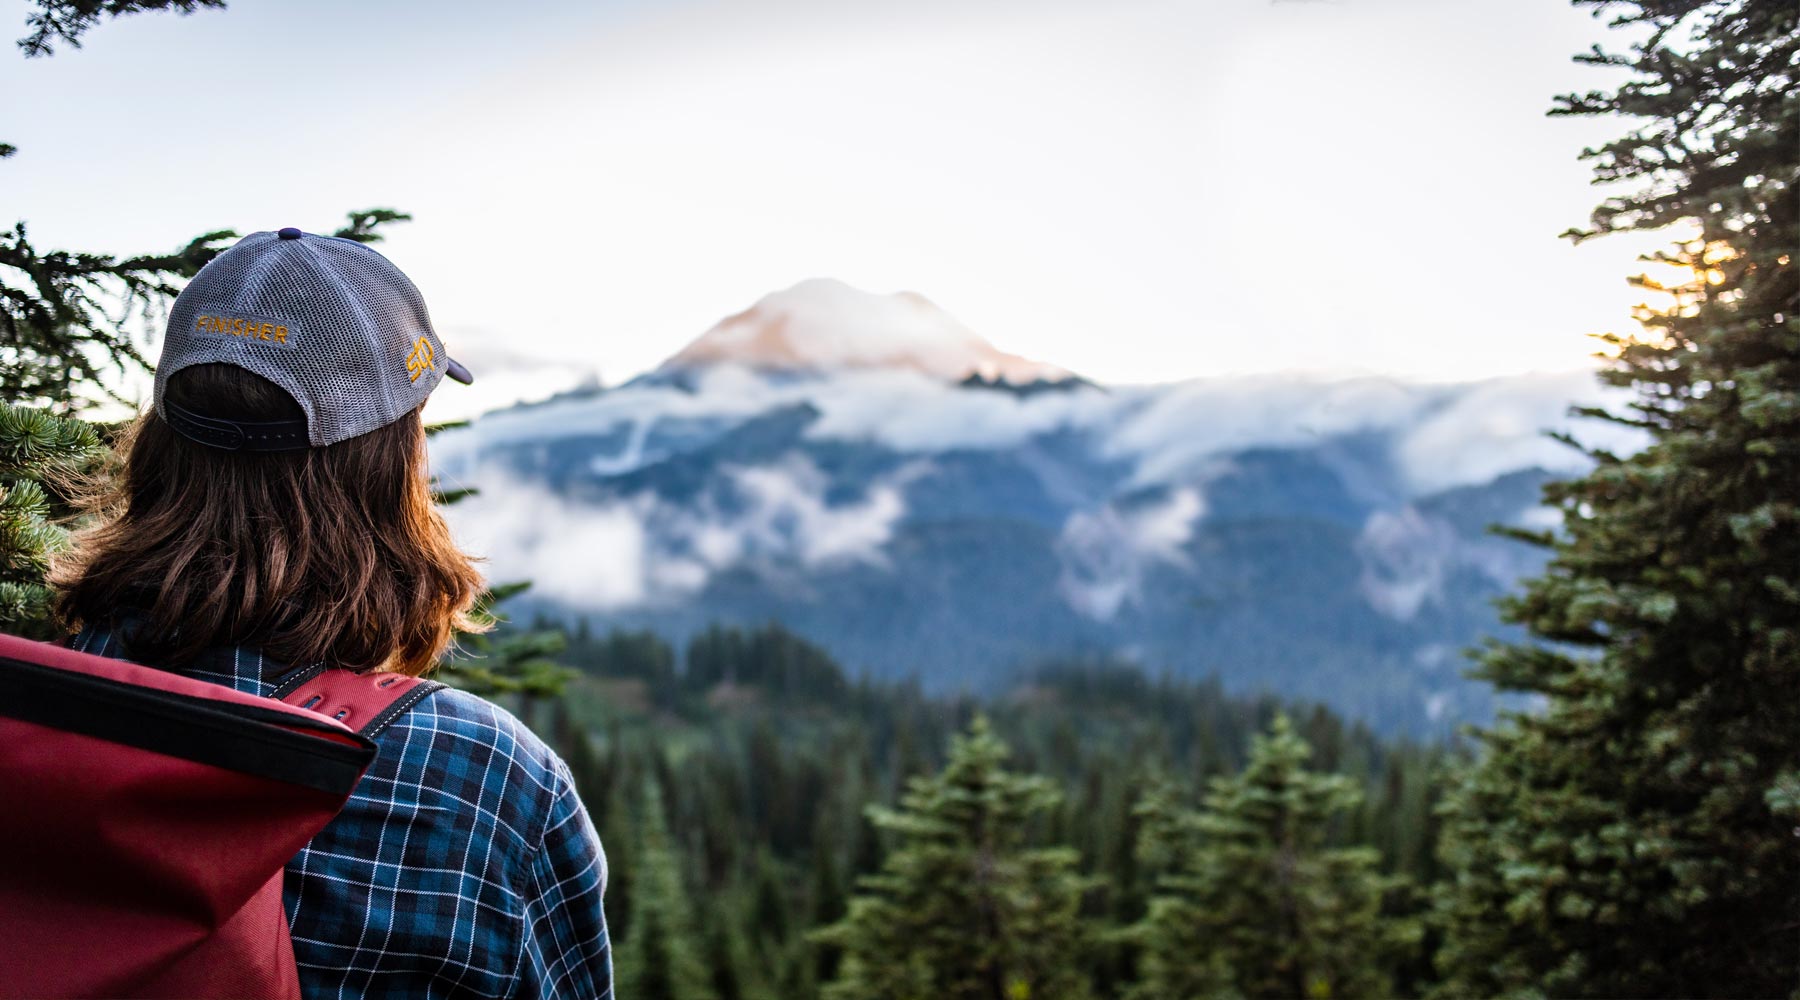 Going Solo: Tips for Safely Hiking Alone | Cloudline Apparel